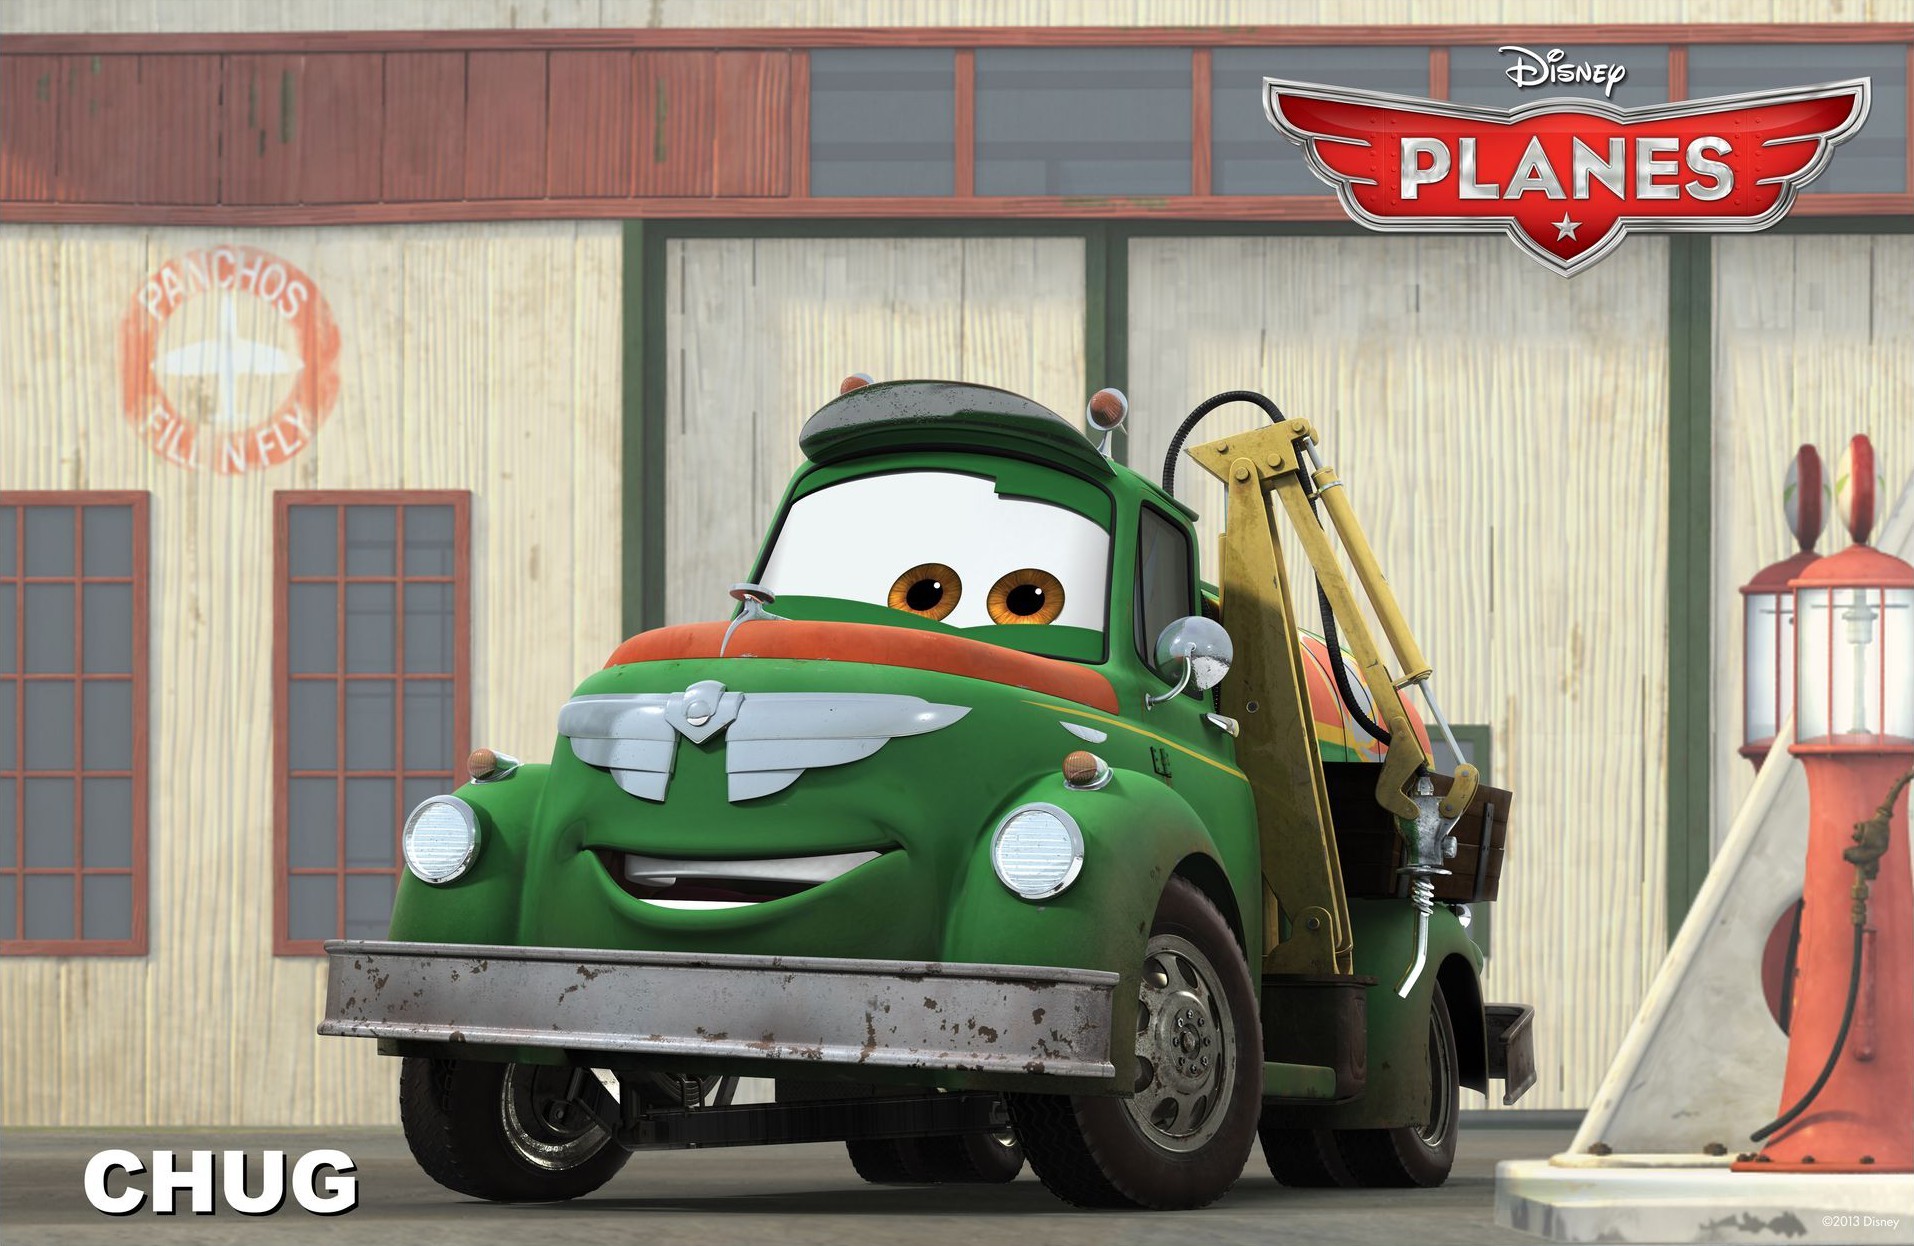 Chug from Walt Disney Pictures' Planes (2013)